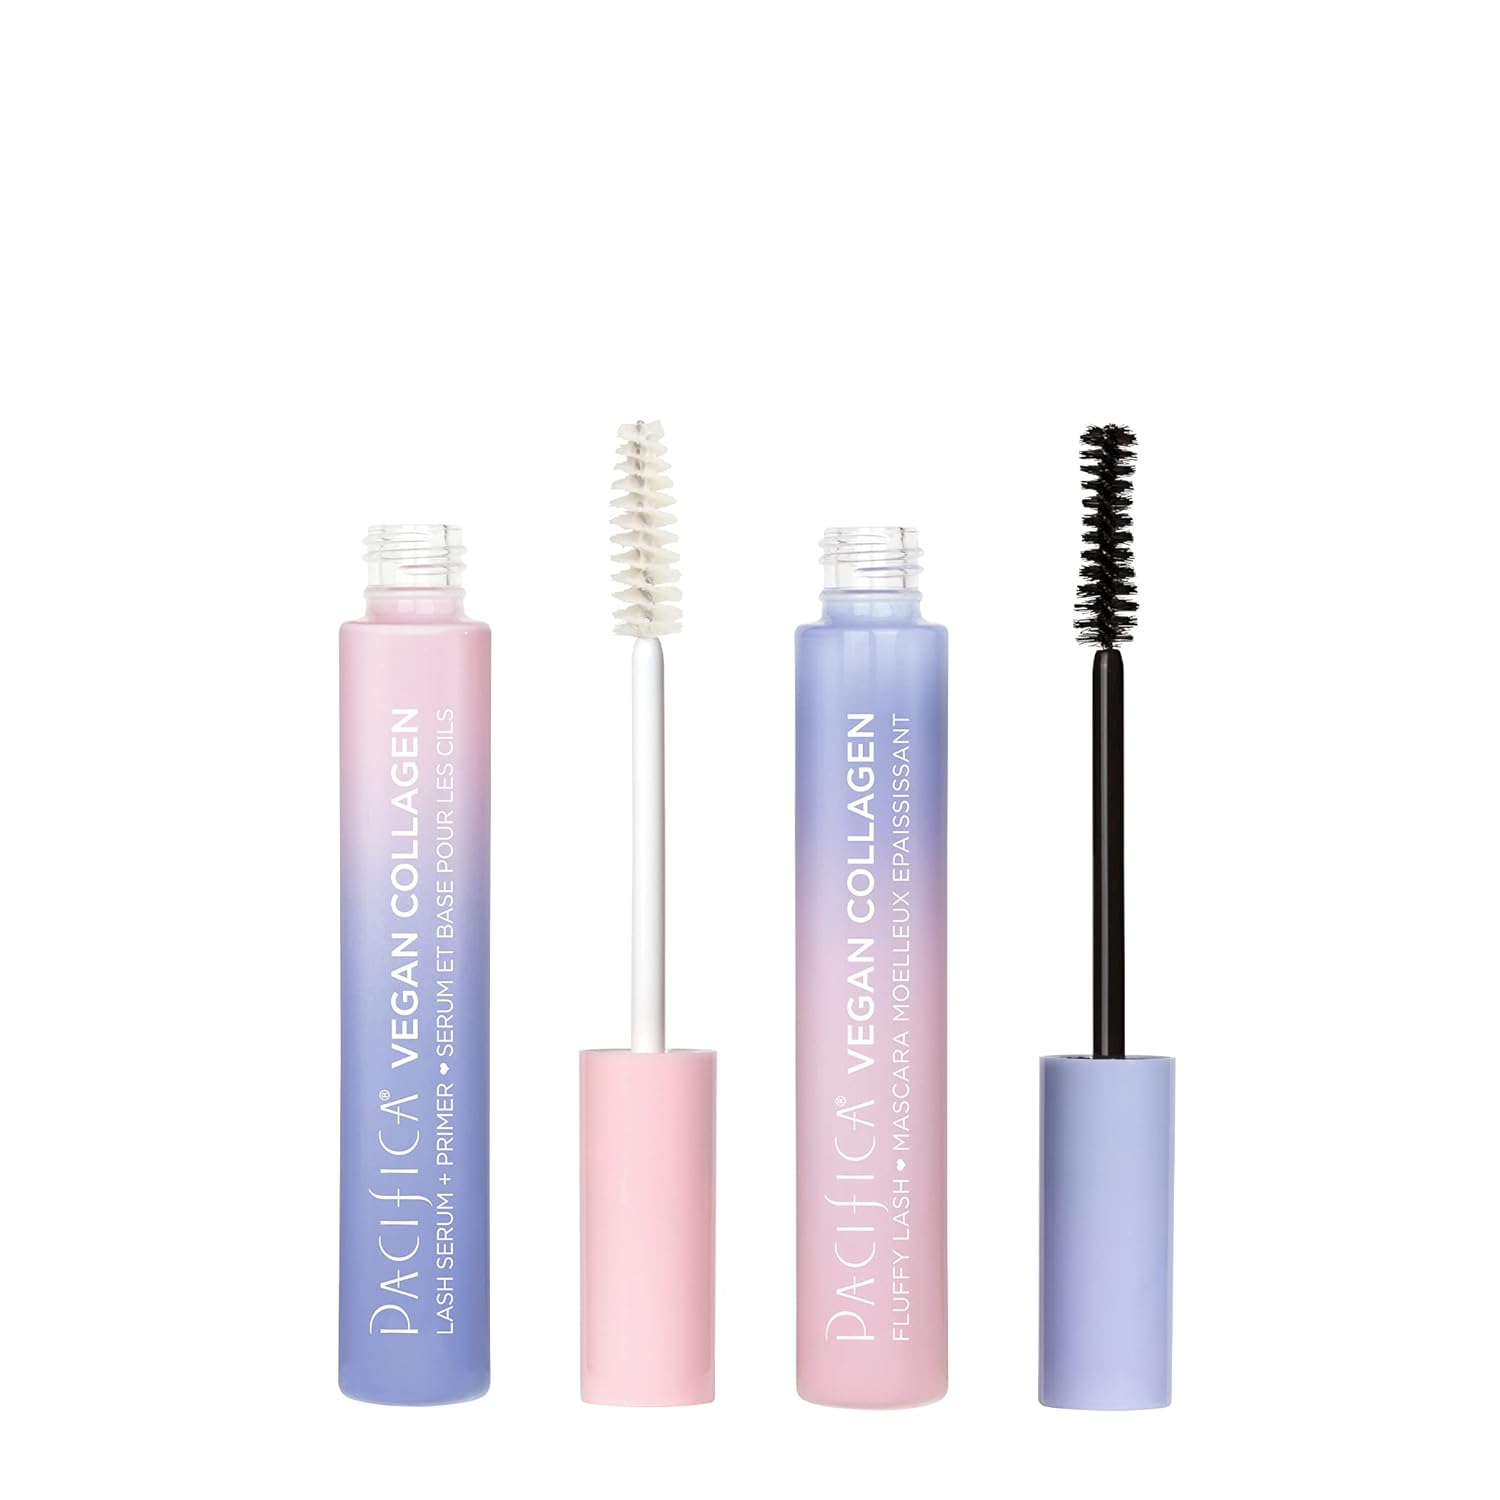 Pacifica Beauty, Vegan Collagen Fluffy Lash Duo, Black Mascara for Volume and Length + Conditioning Lash Serum & Primer, Feathery Full Fashes, Cruelty Free, Pack of 2